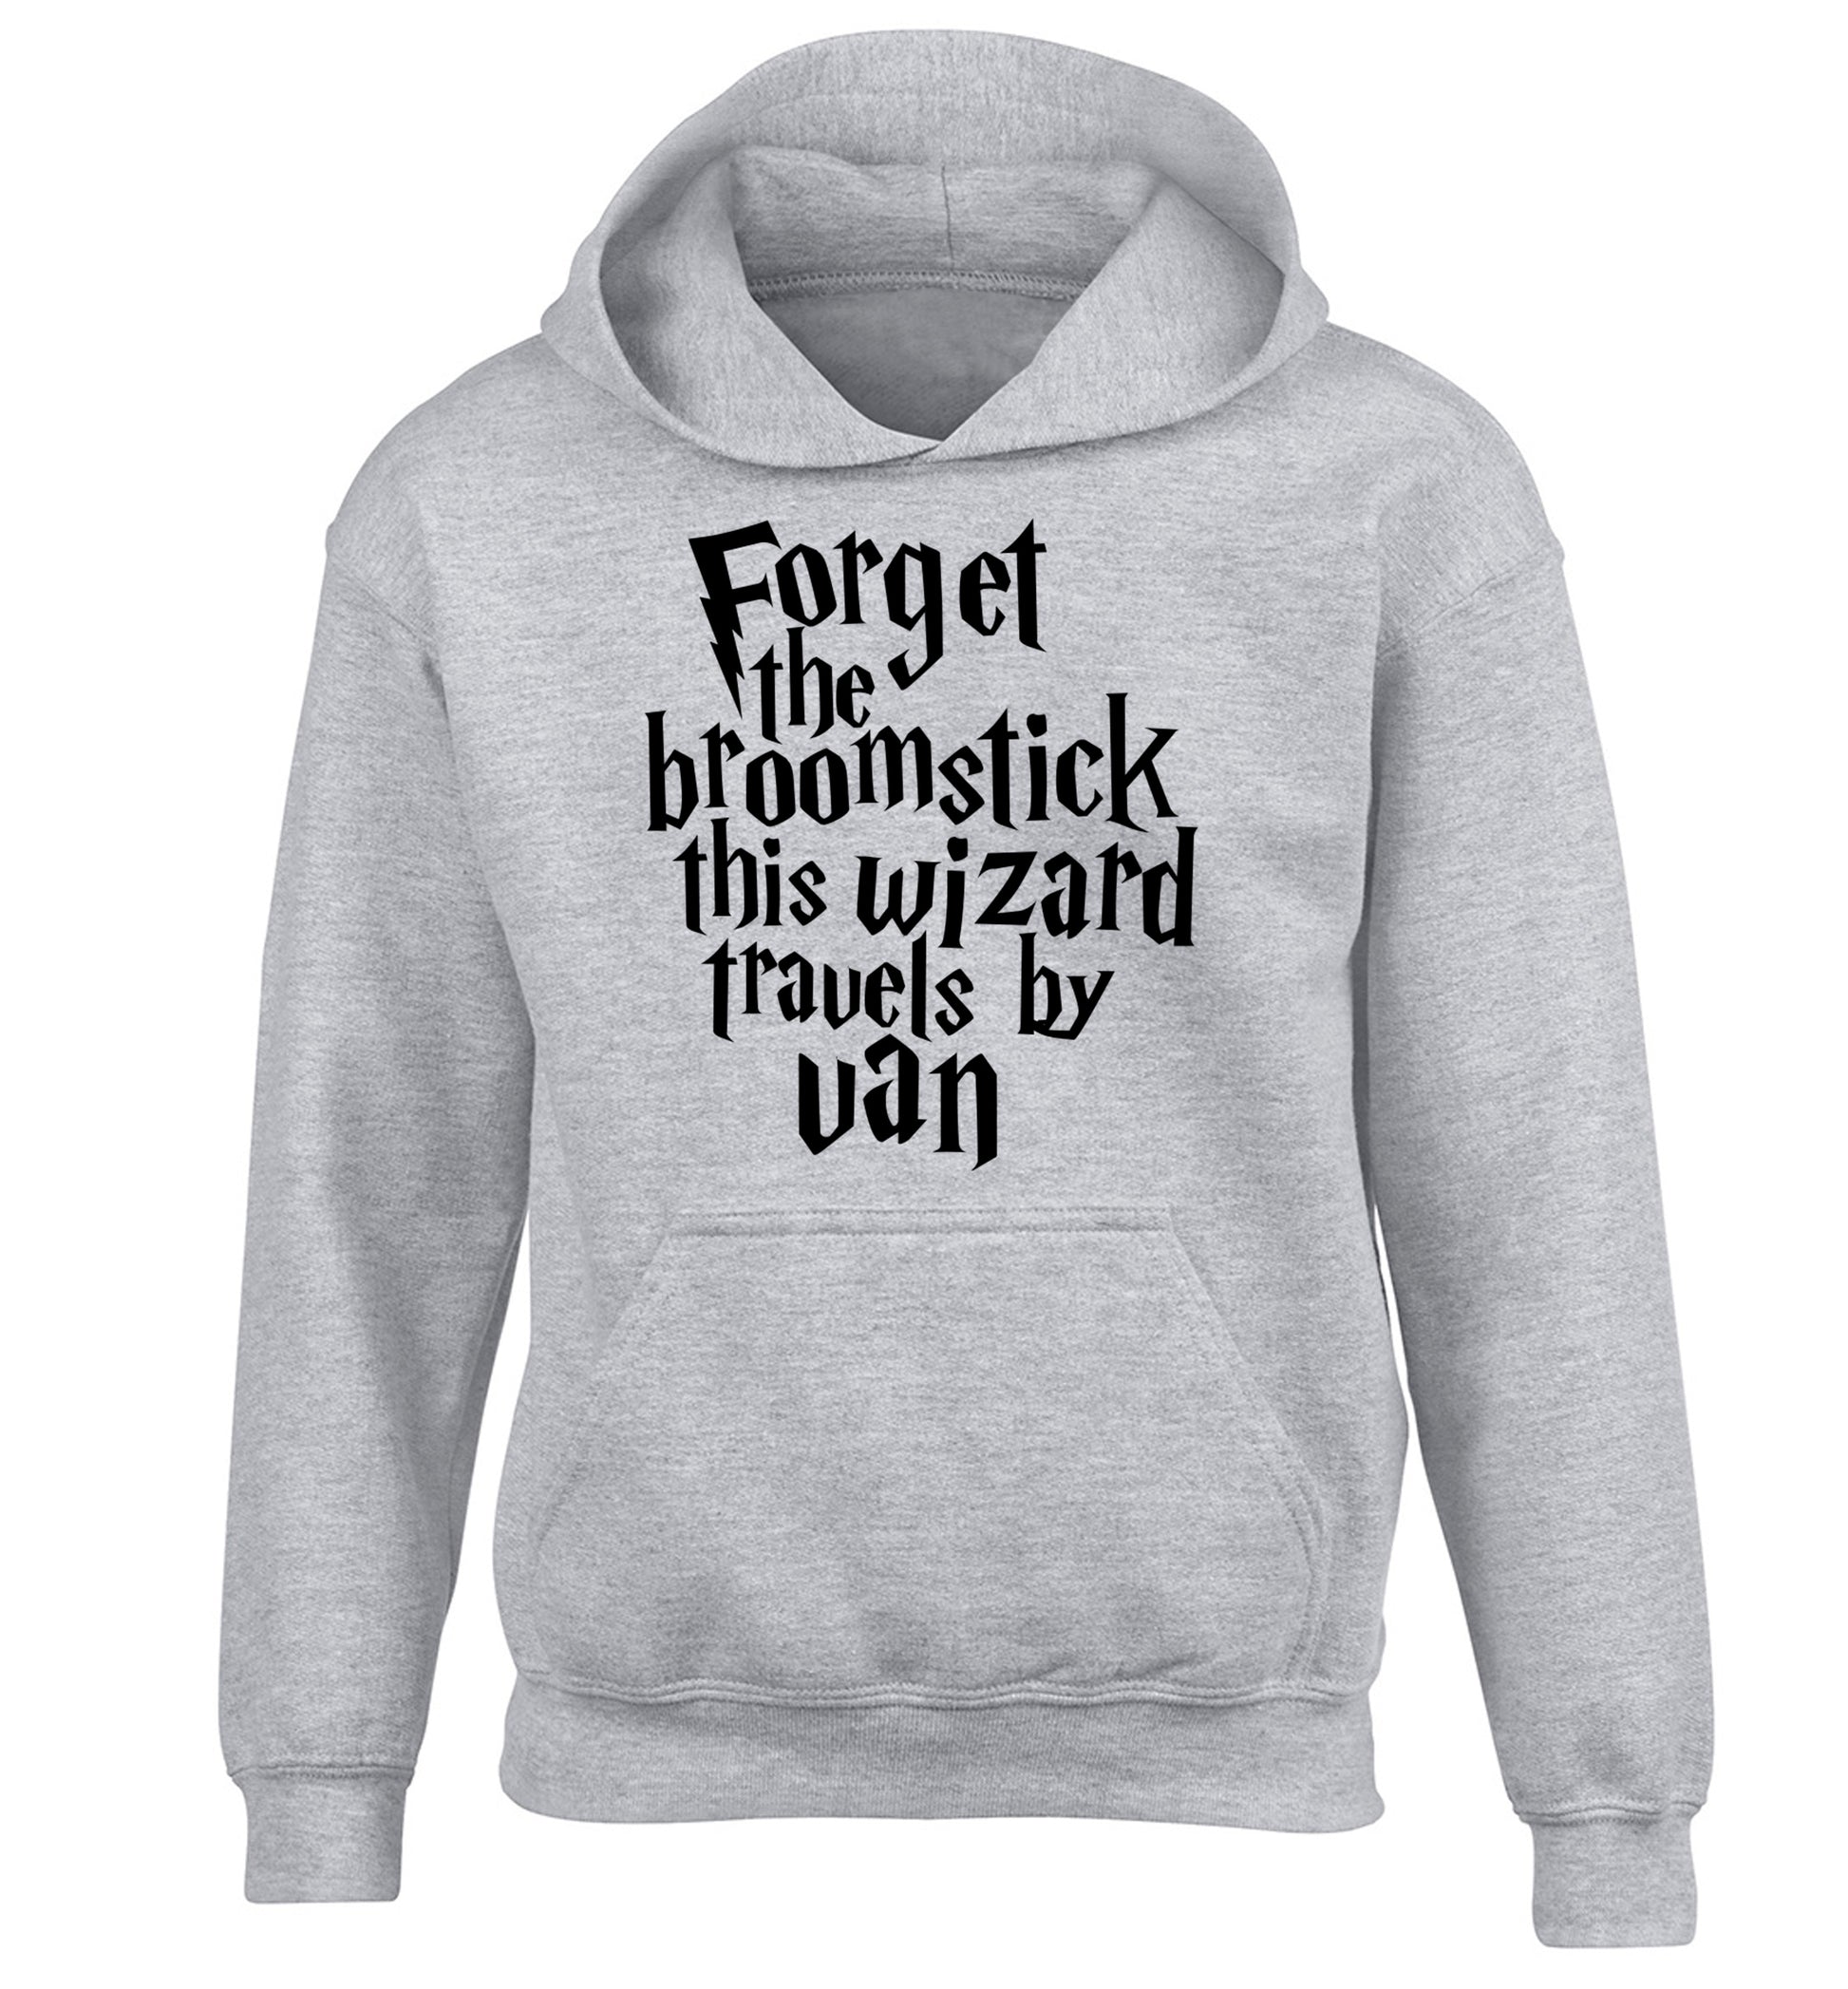 Forget the broomstick this wizard travels by van children's grey hoodie 12-14 Years